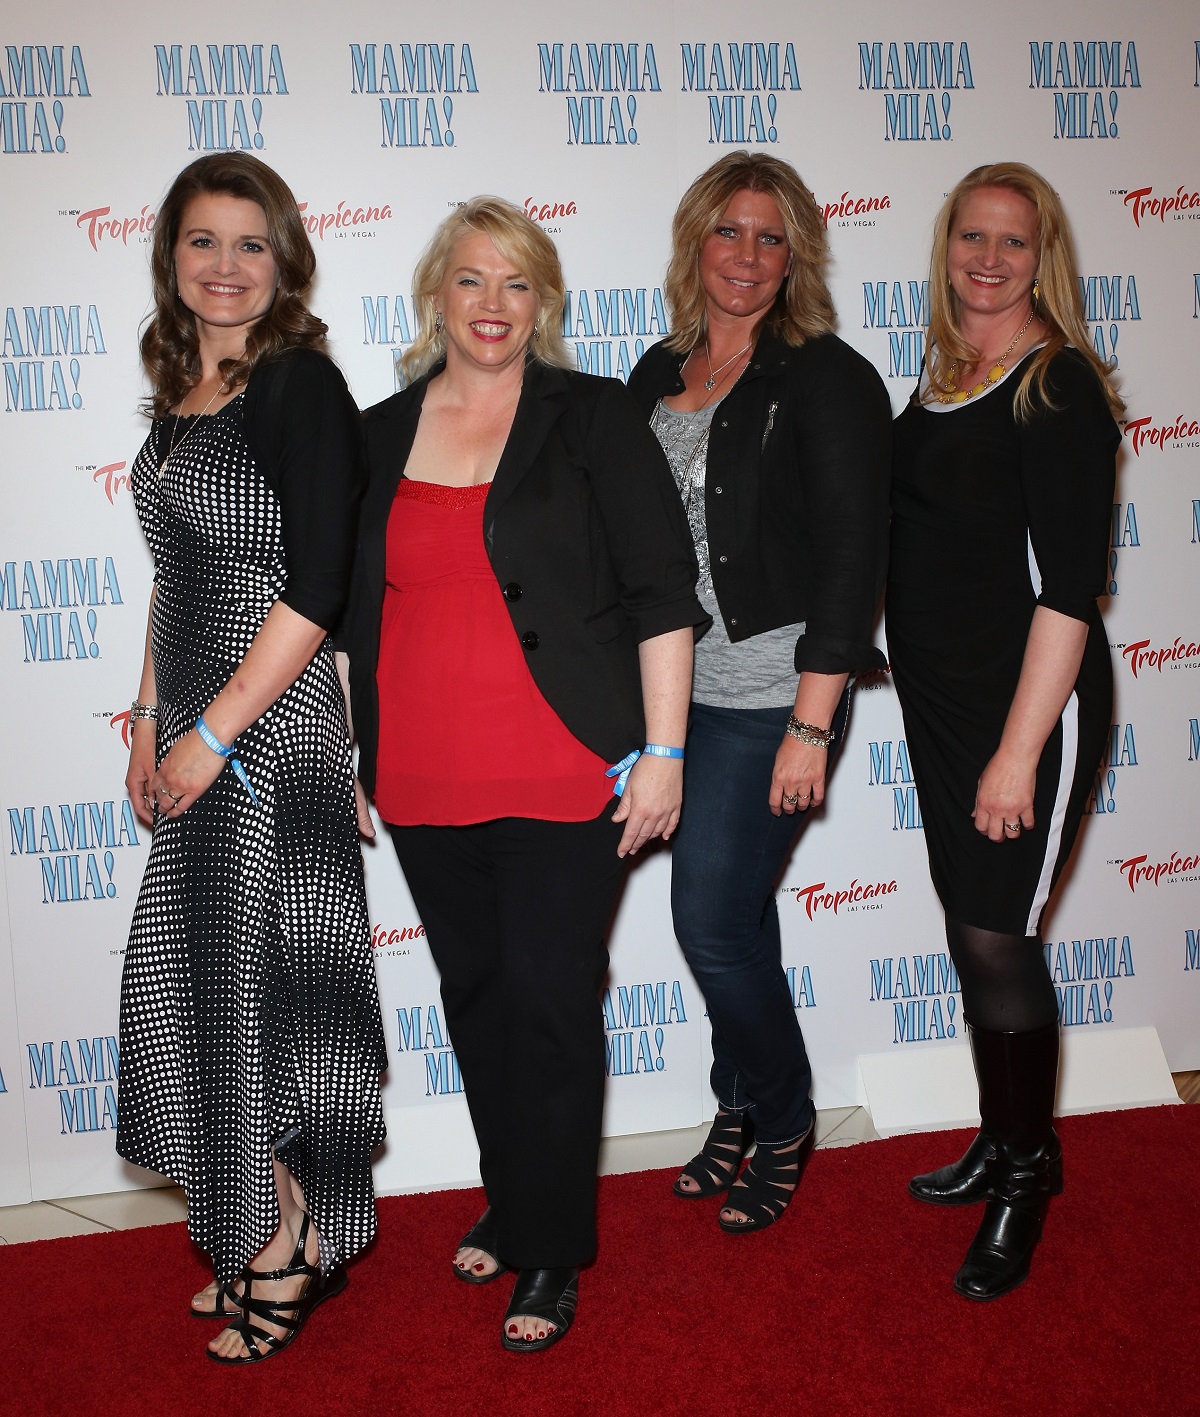 Robyn, Janelle, Meri, and Christine Brown from 'Sister Wives' lined up on the red carpet at 'Mamma Mia!' in Las Vegas